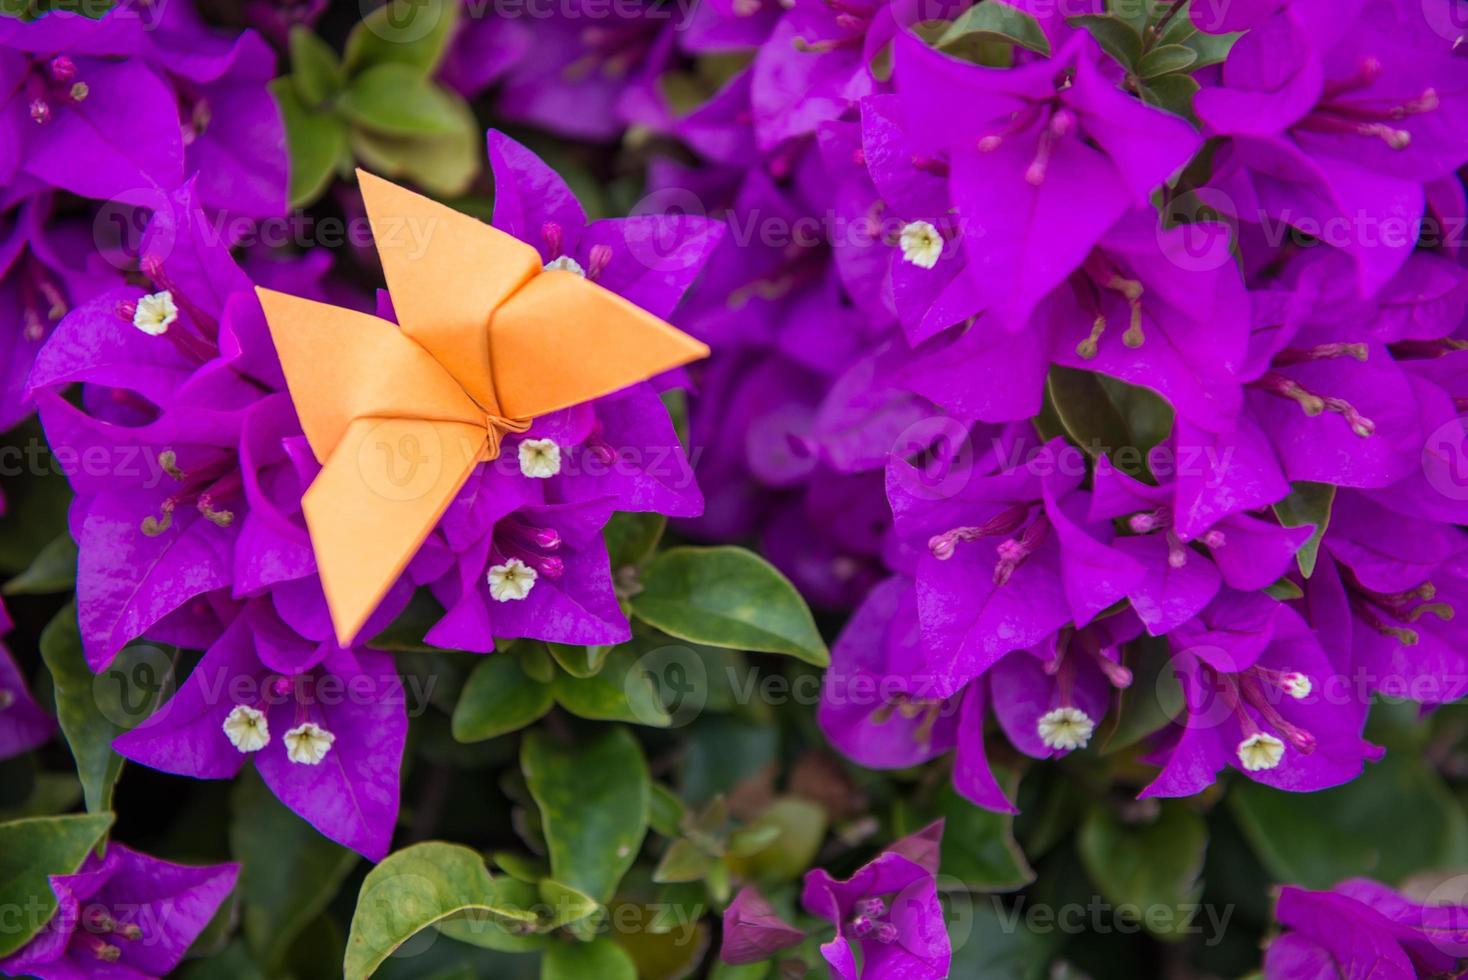 butterfly Origami with flower photo